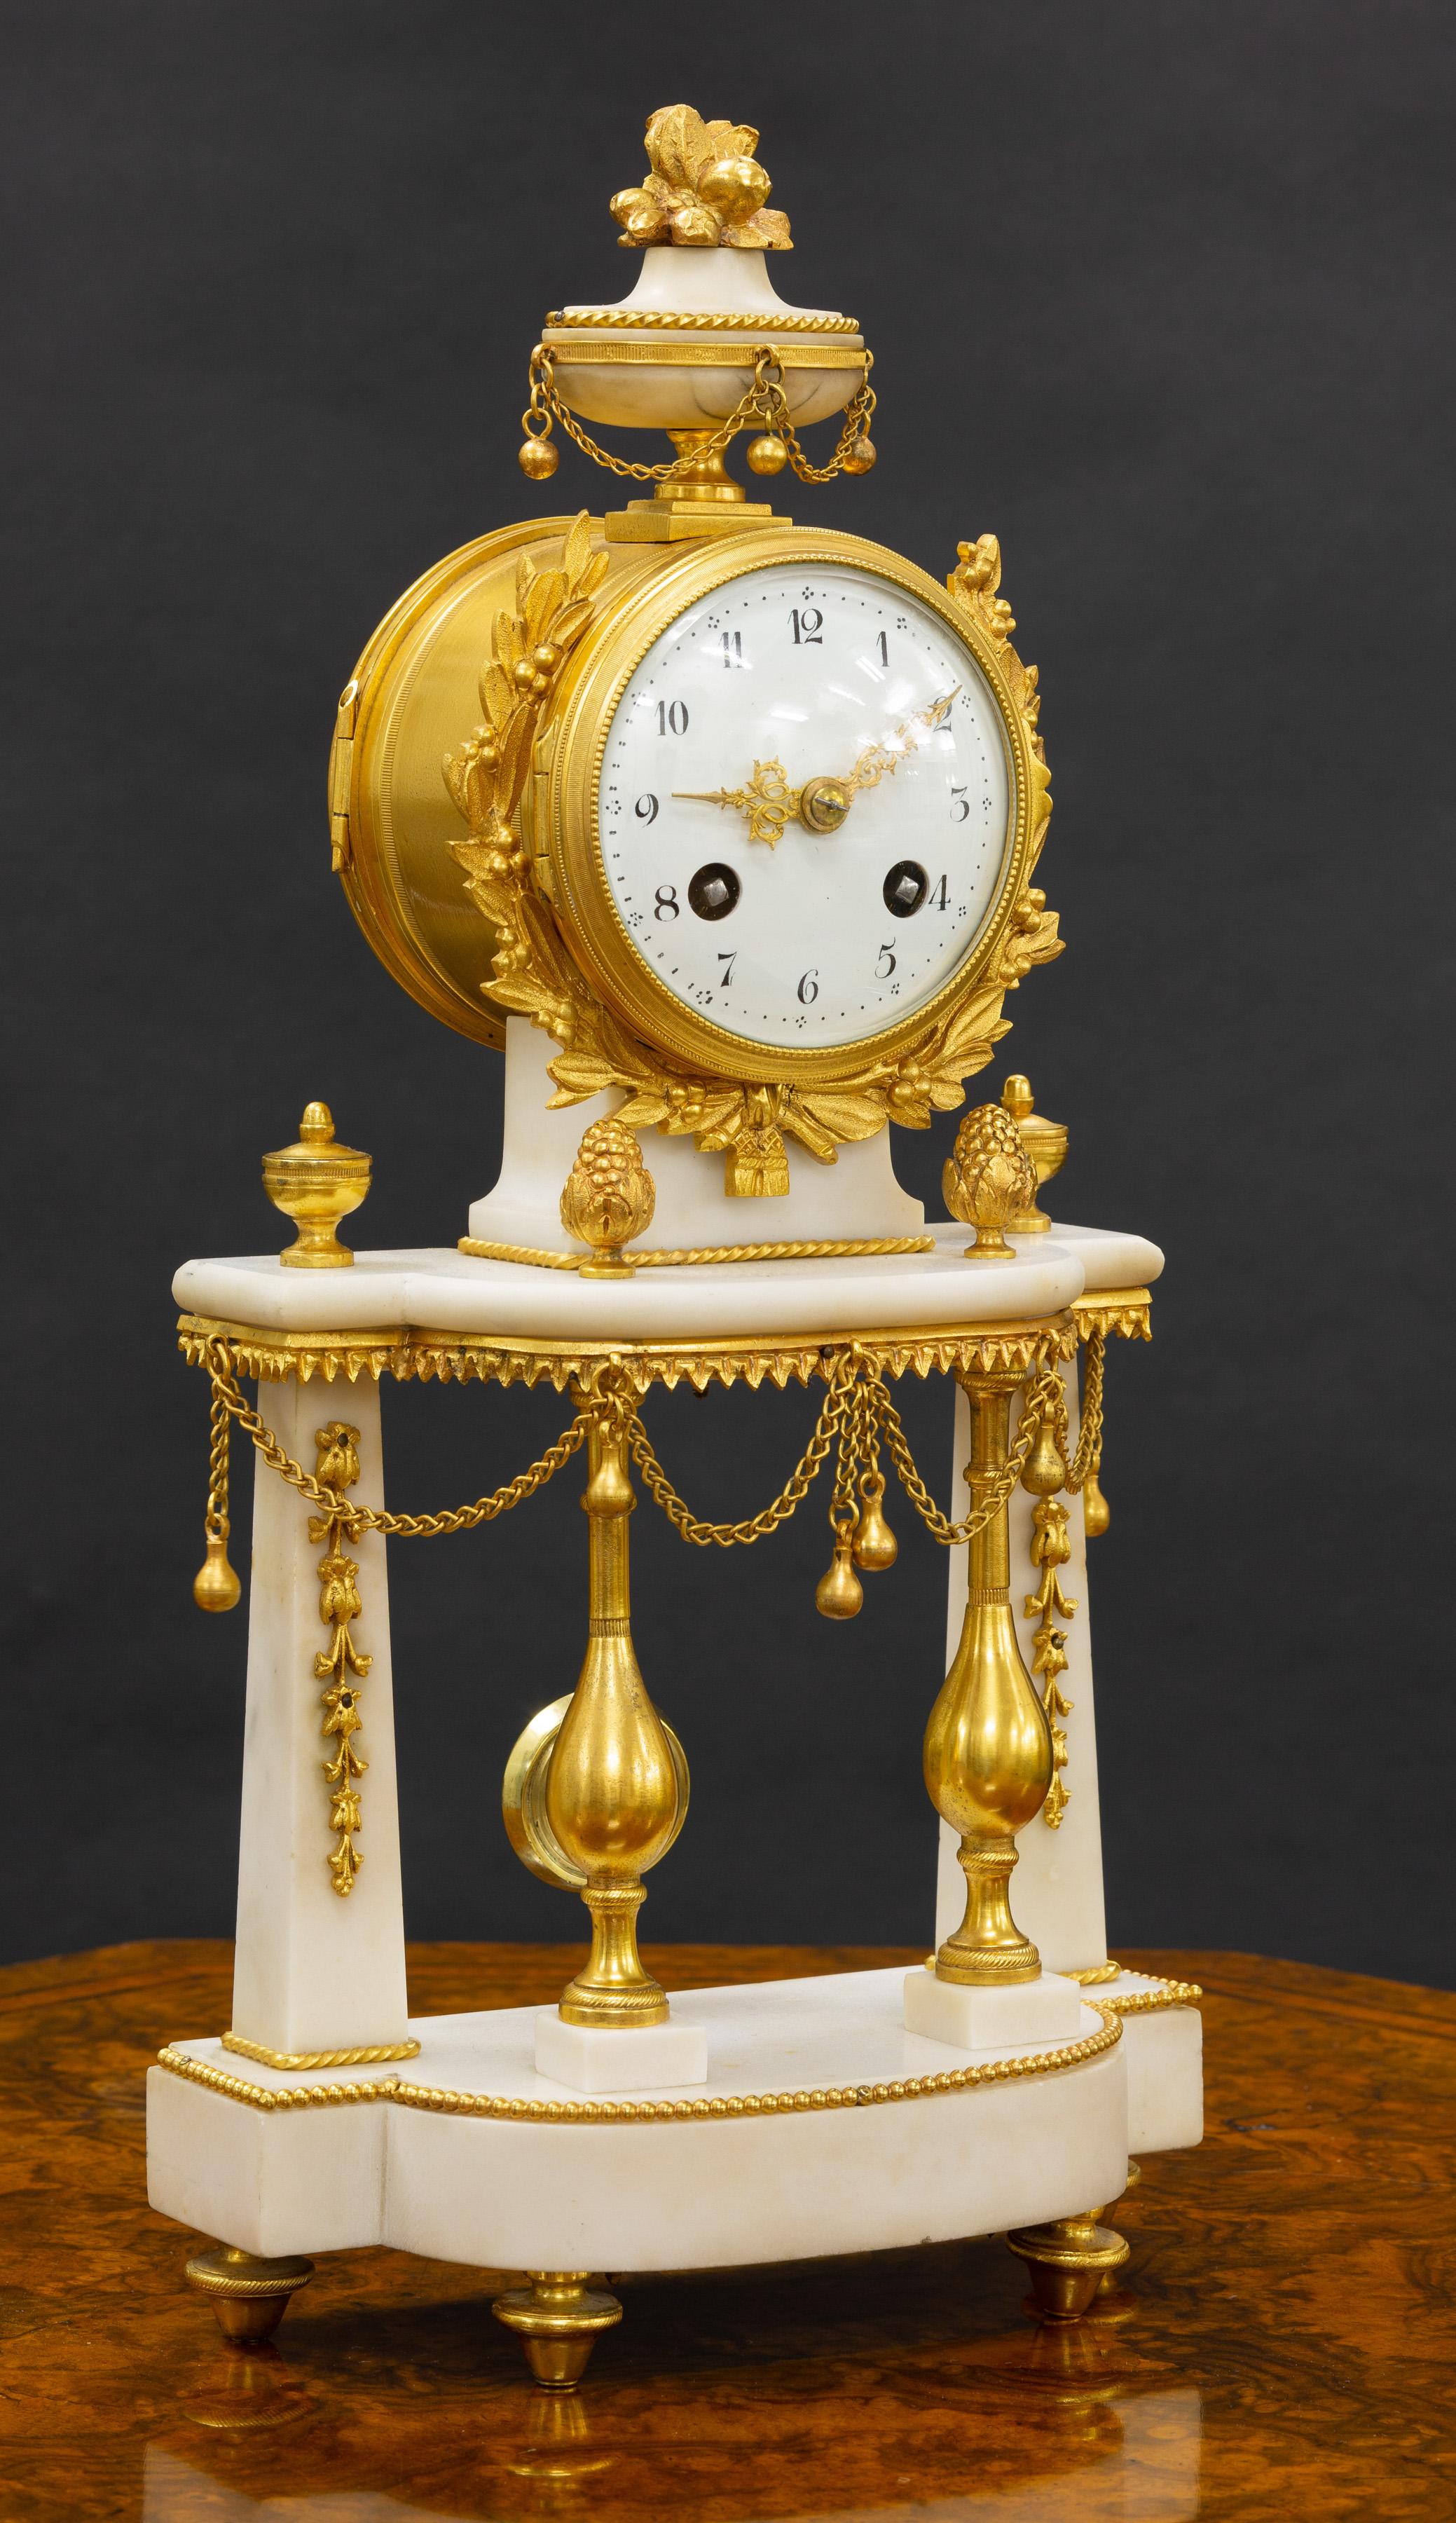 French ormolu and white marble pillar clock with ormolu mounts surmounted by an ornate finial with and standing on four gilded bun feet. 

The four pillars have fine ormolu mounts and are decorated with ornate chain swags. 

Enamel dial with